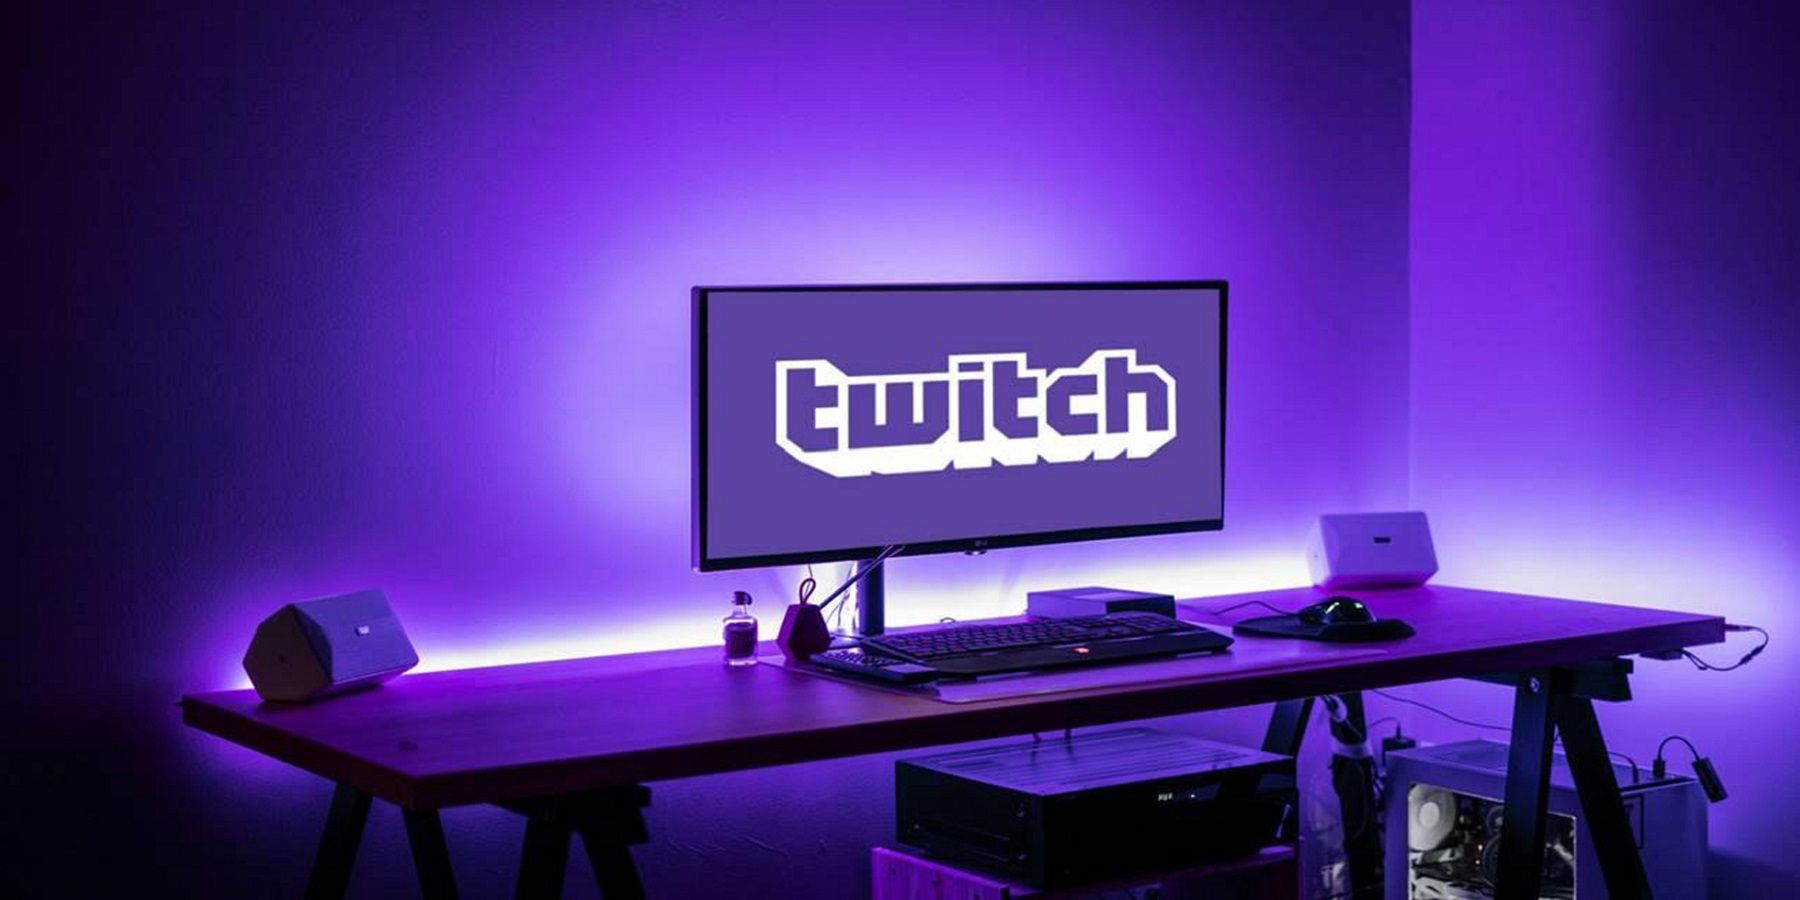 A phot of a PC monitor on a desk showing the Twitch logo, all glowing purple.